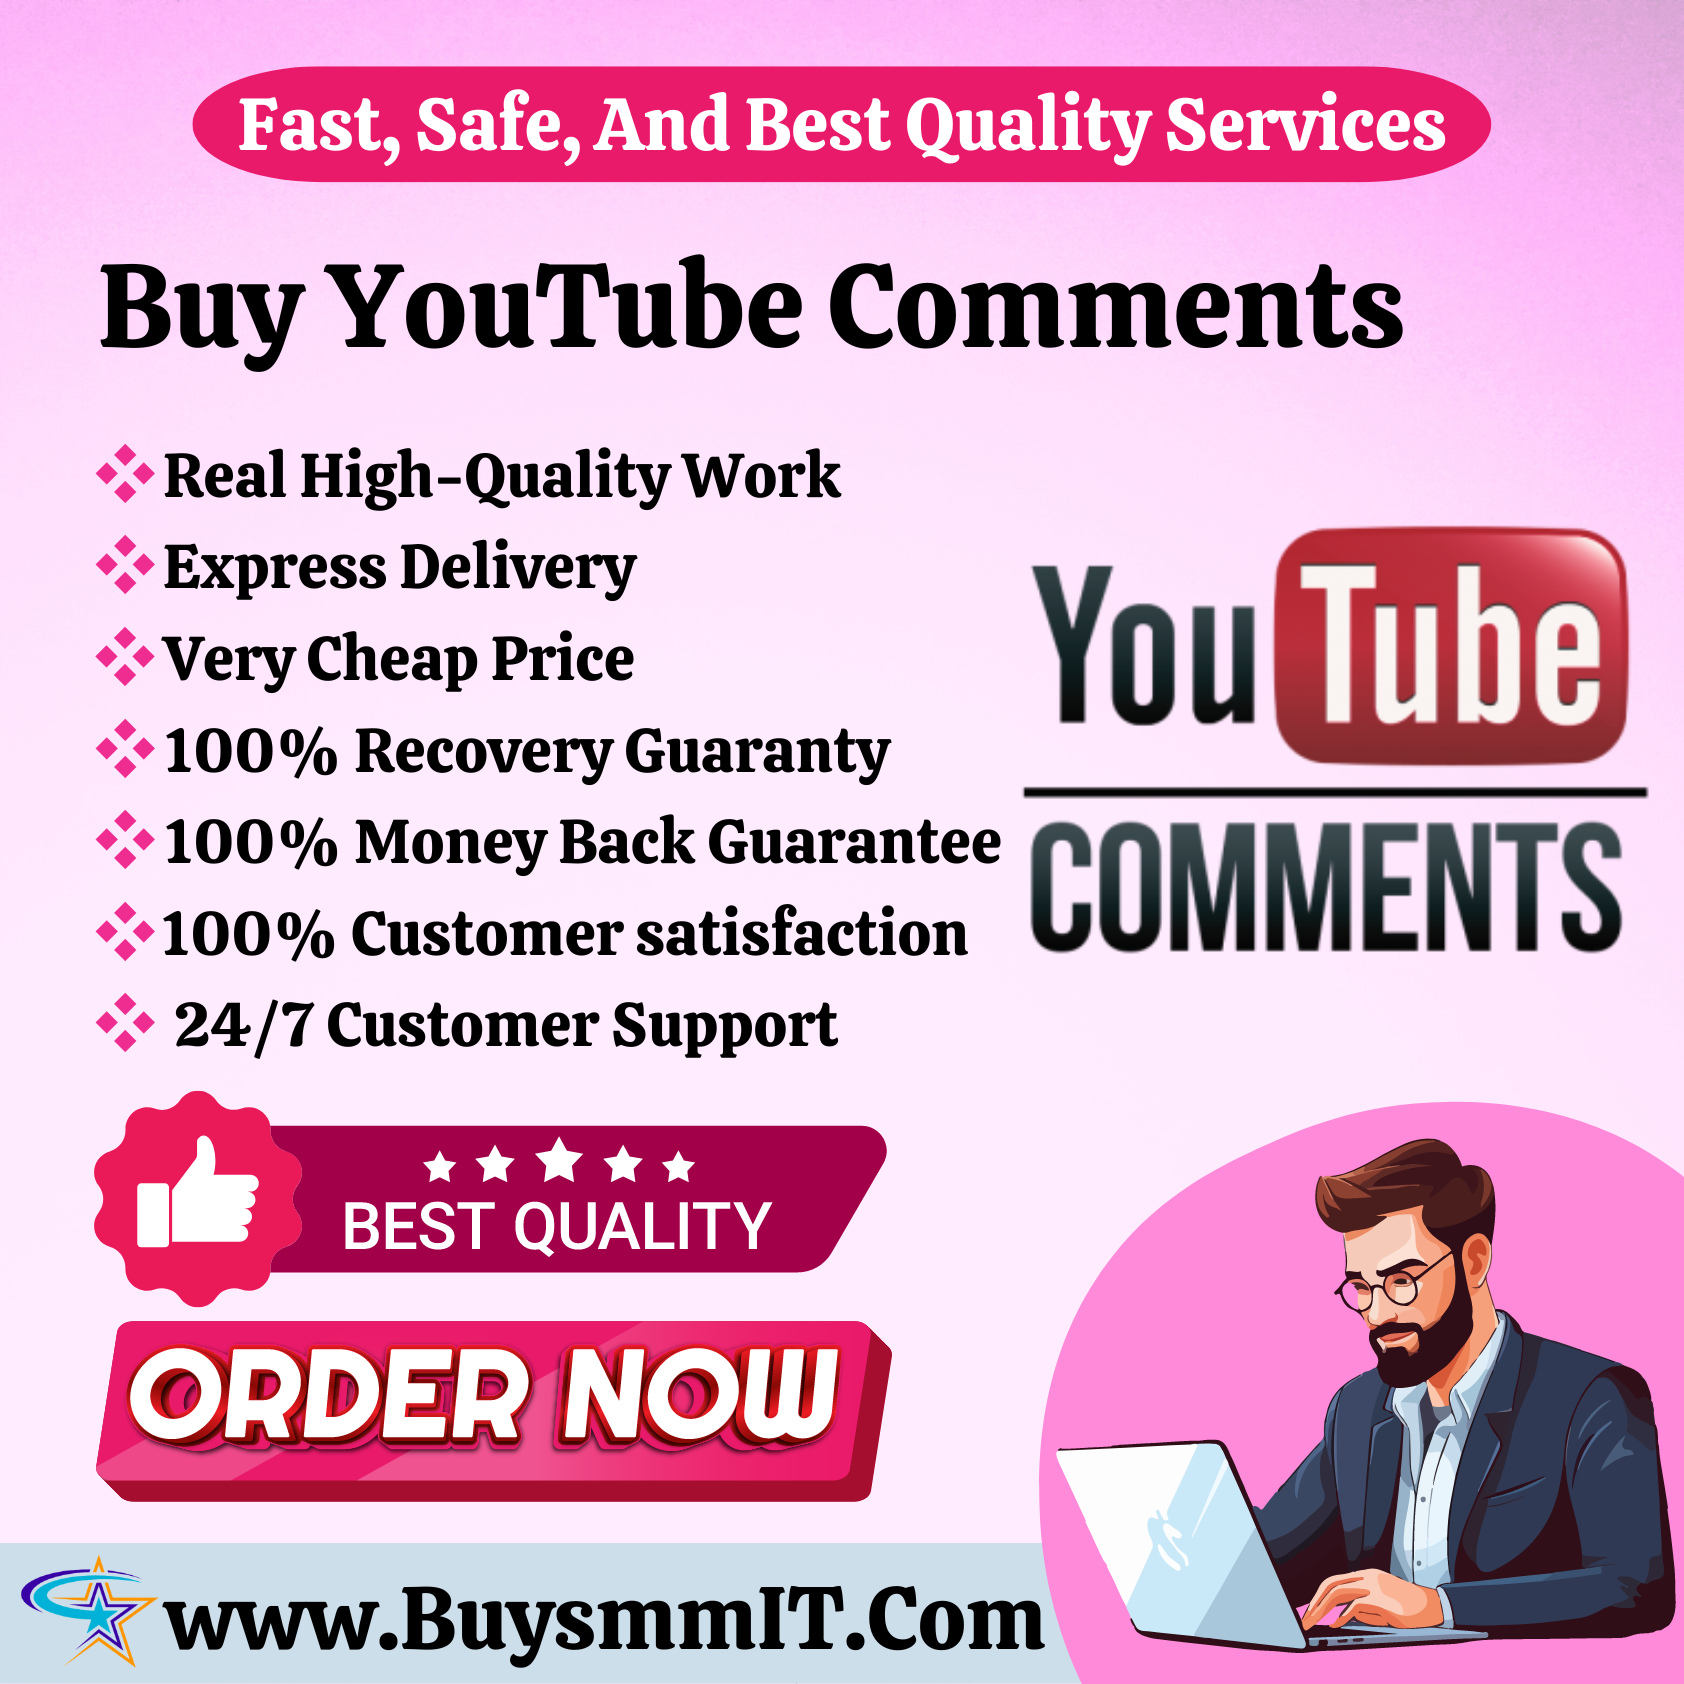 Buy YouTube Comments - 100% Real, Active, Cheap